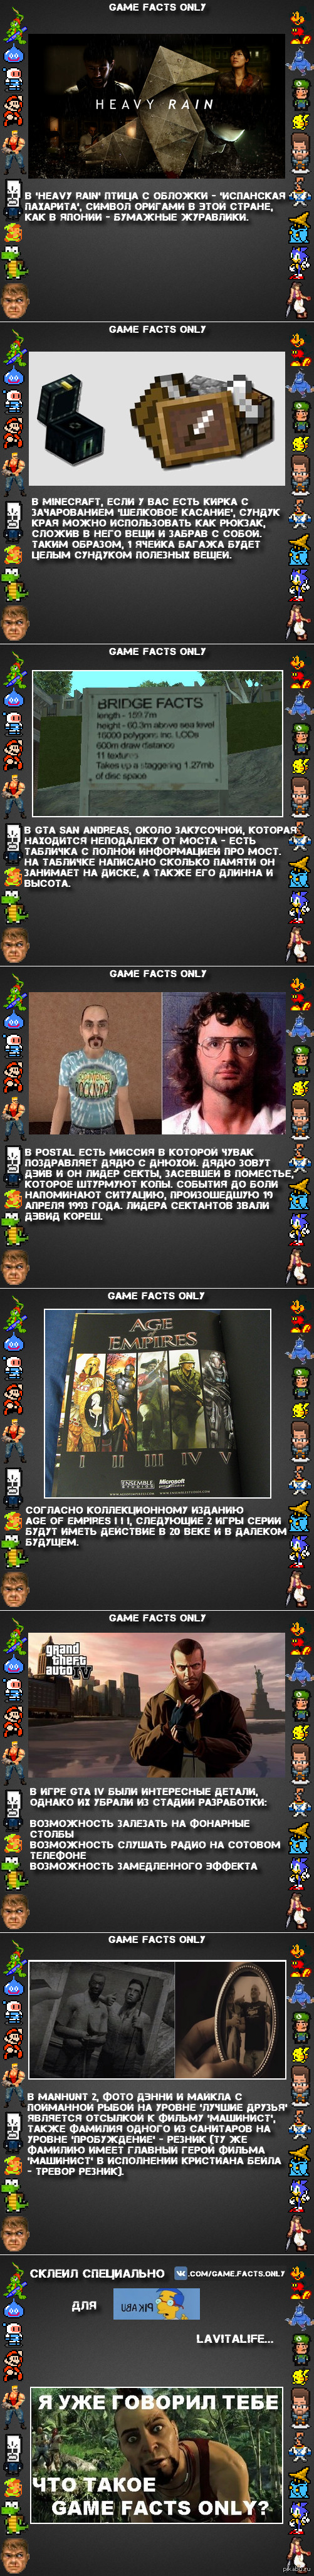 Facts from the Games (Part XXXVIII) - Longpost, Facts, Games, Game facts only, Lavitalife, Heavy rain, Gta iv, Postal